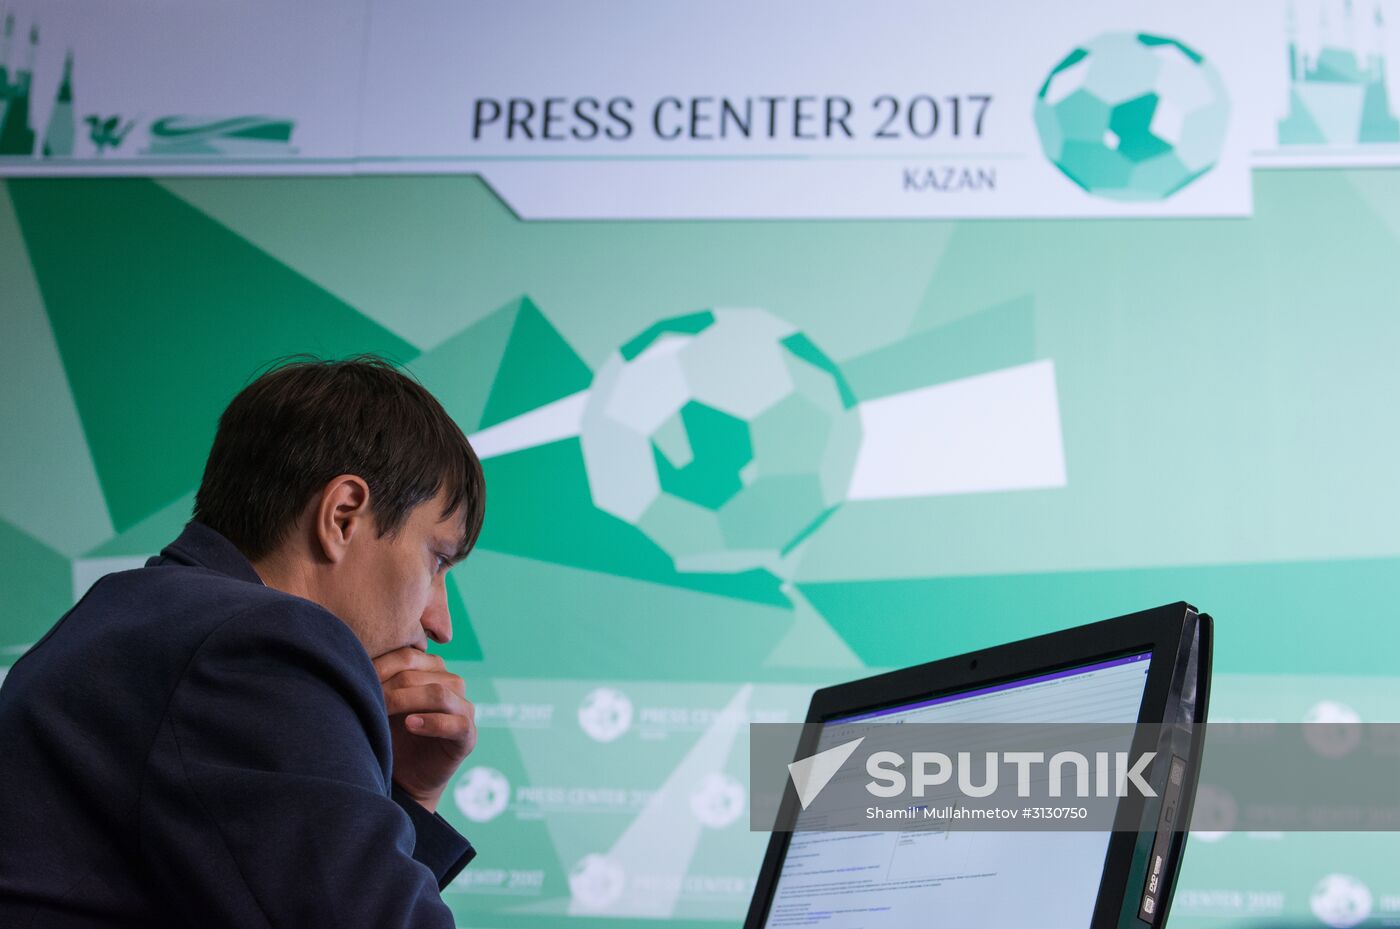 Opening of 2017 Confederations Cup multimedia press centers for non-accredited media